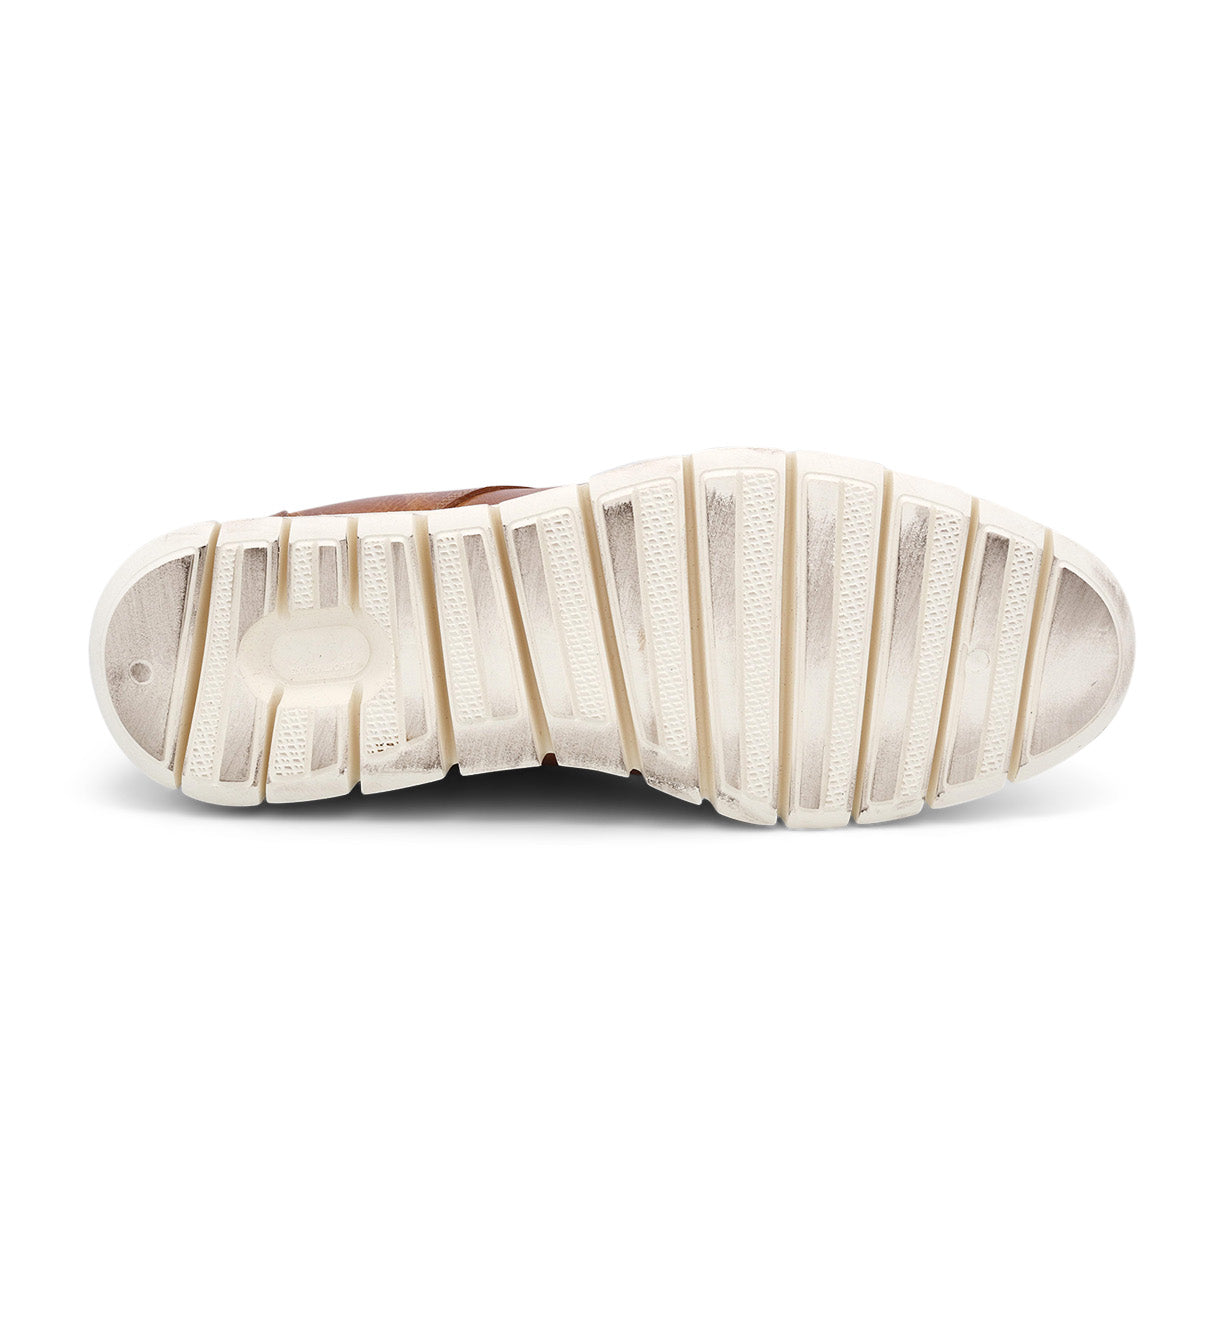 A pair of Bed Stu Cayuga II shoes with a white sole on a white background.